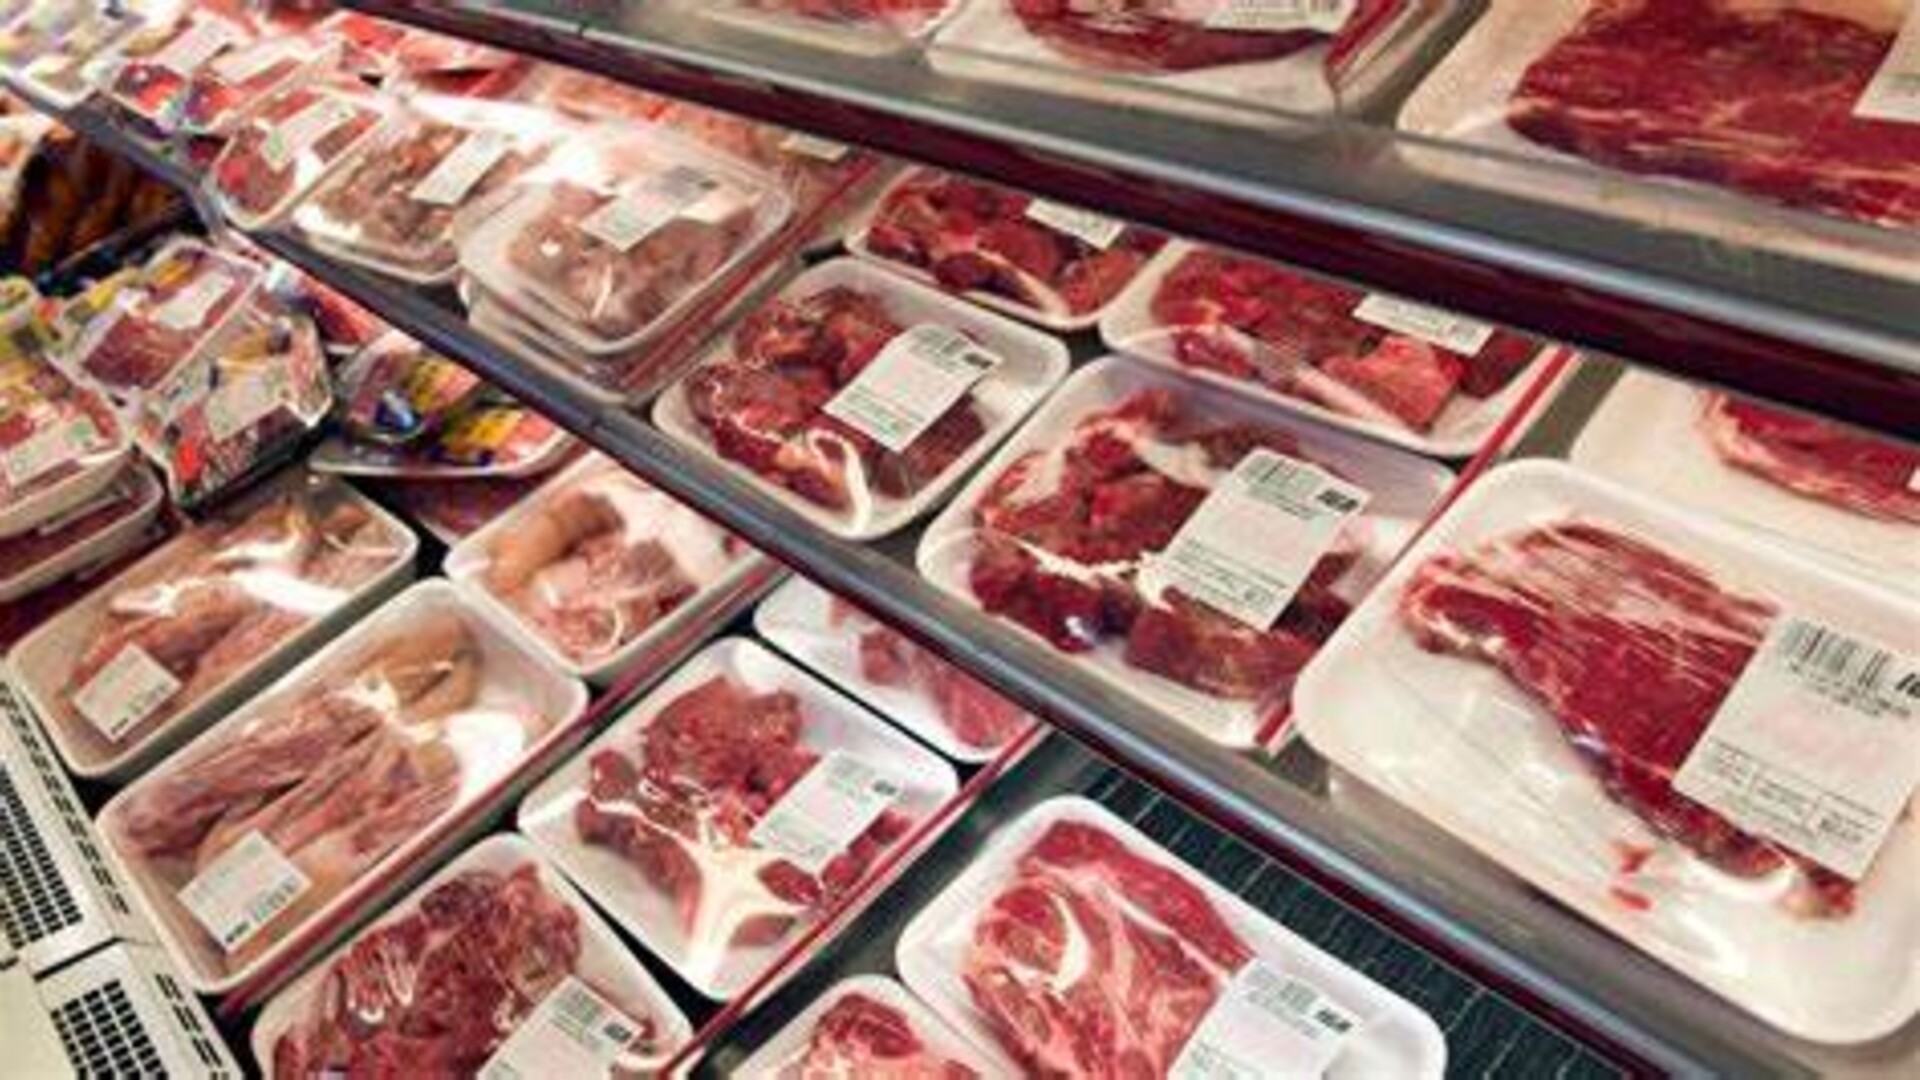 Beef Demand Strong at the Grocery Store